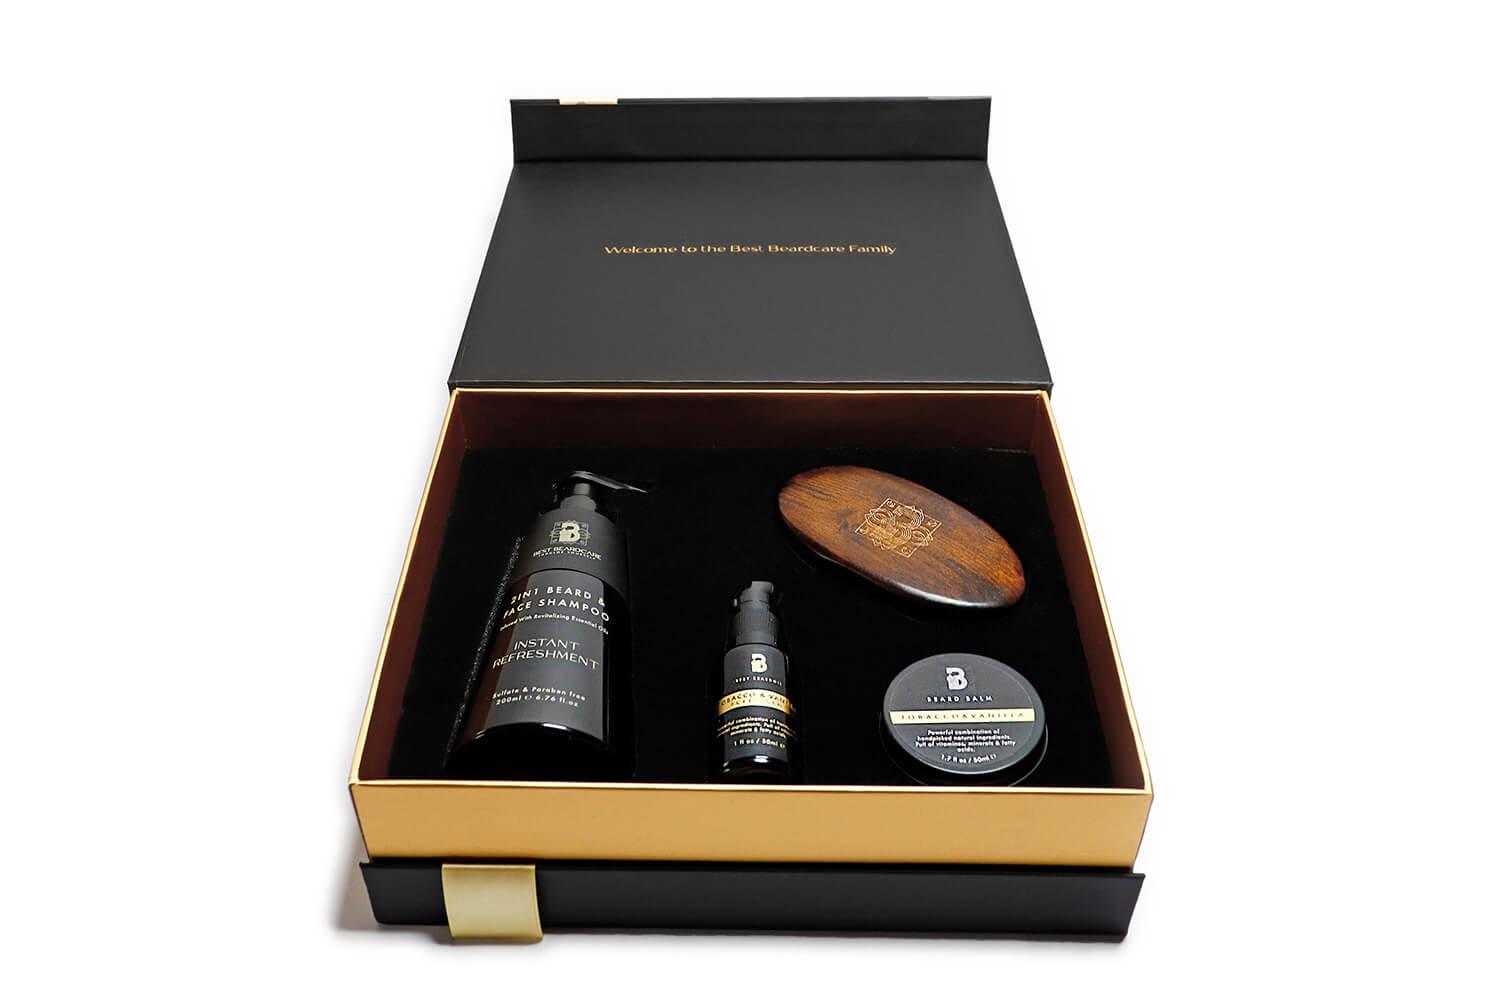 Tobacco & Vanilla Gift Set Beard Grooming Kit with box, shampoo, lotion, and wooden oval logo object. Includes beard oil, wax, and brush.